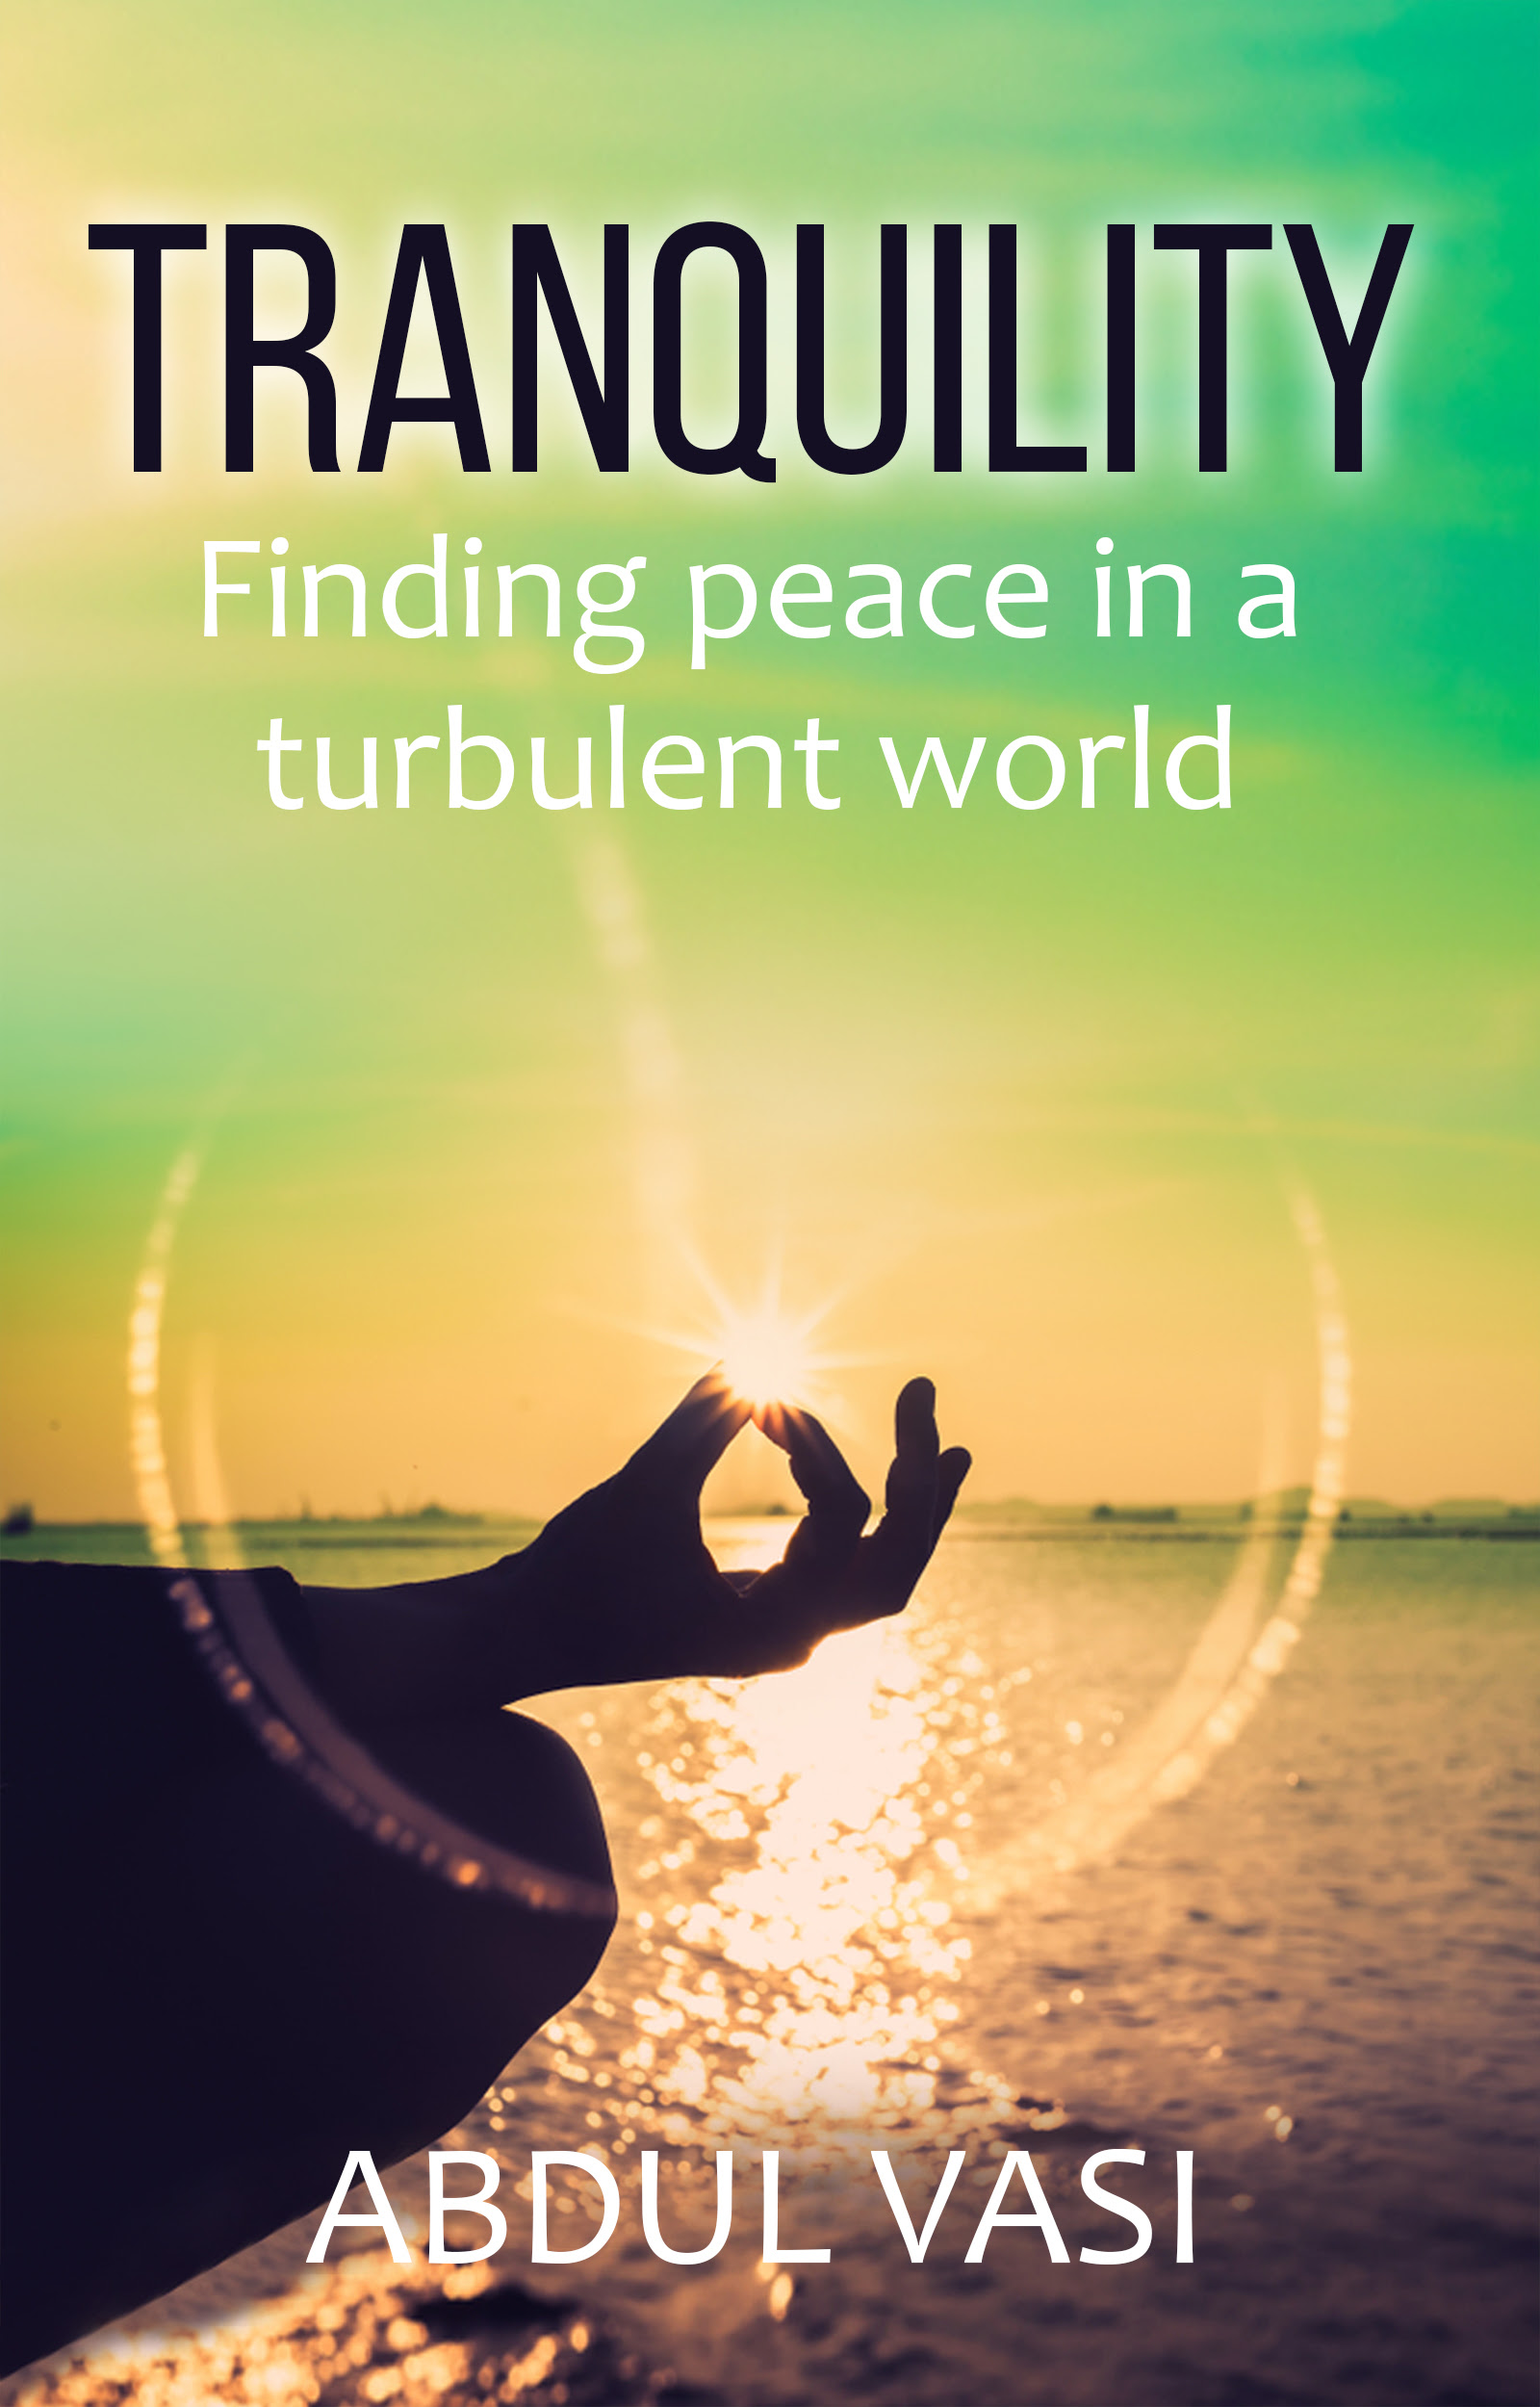 FREE: Self Motivational Book  – Tranquility Finding Peace In Turbulent World. by Abdul Vasi